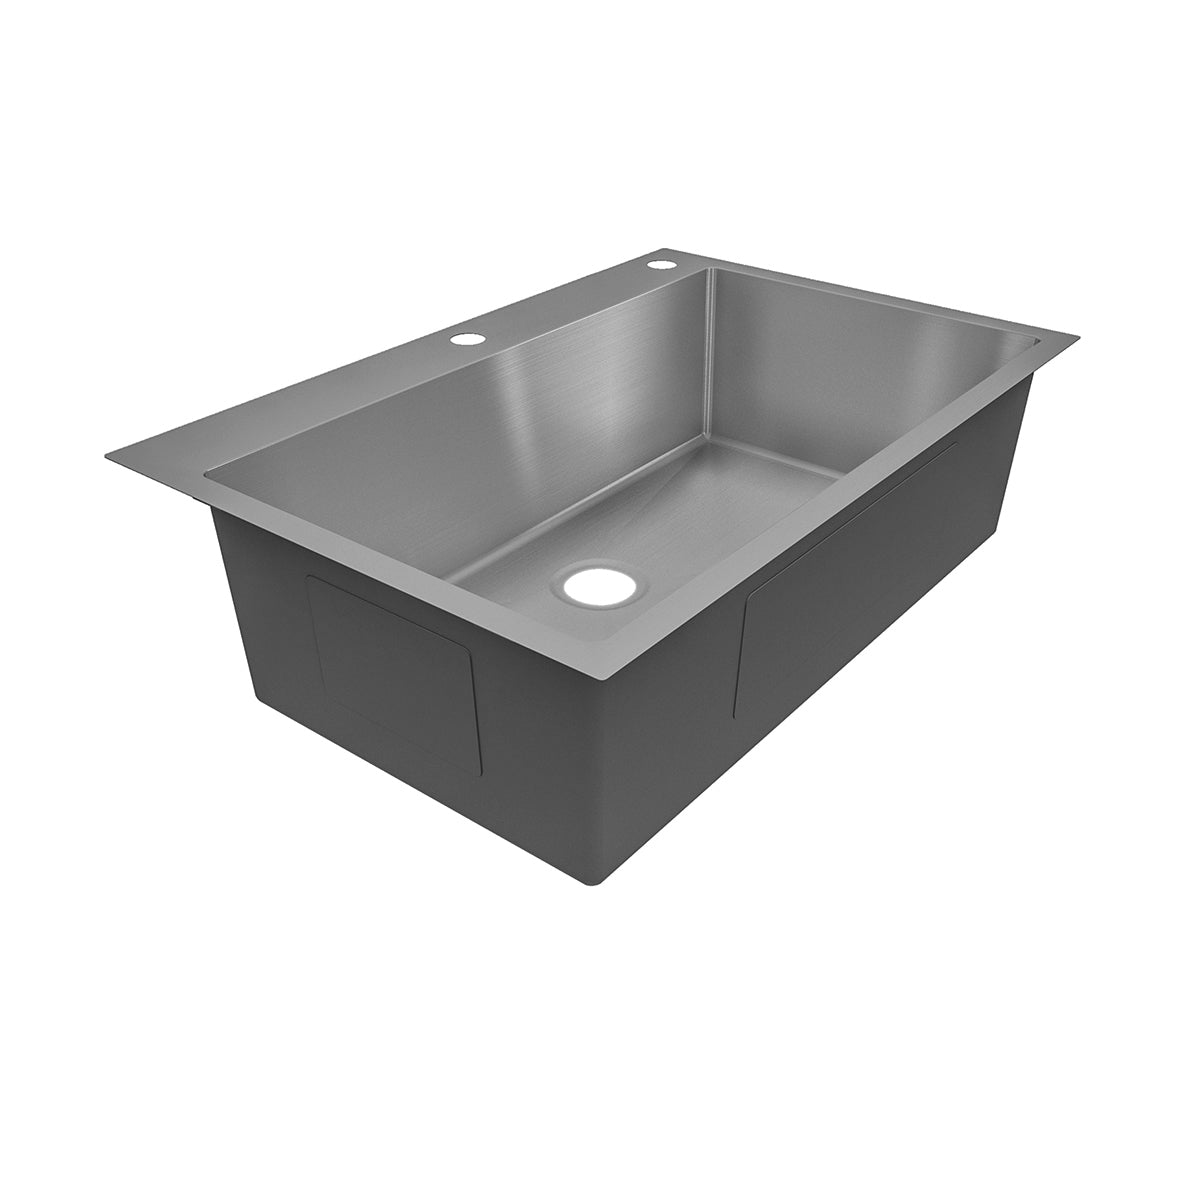 Sinber 33" x 22" x 9" Drop In Single Bowl Kitchen Sink with 18 Gauge 304 Stainless Steel Satin Finish HT3322S-S-9 (Sink Only)